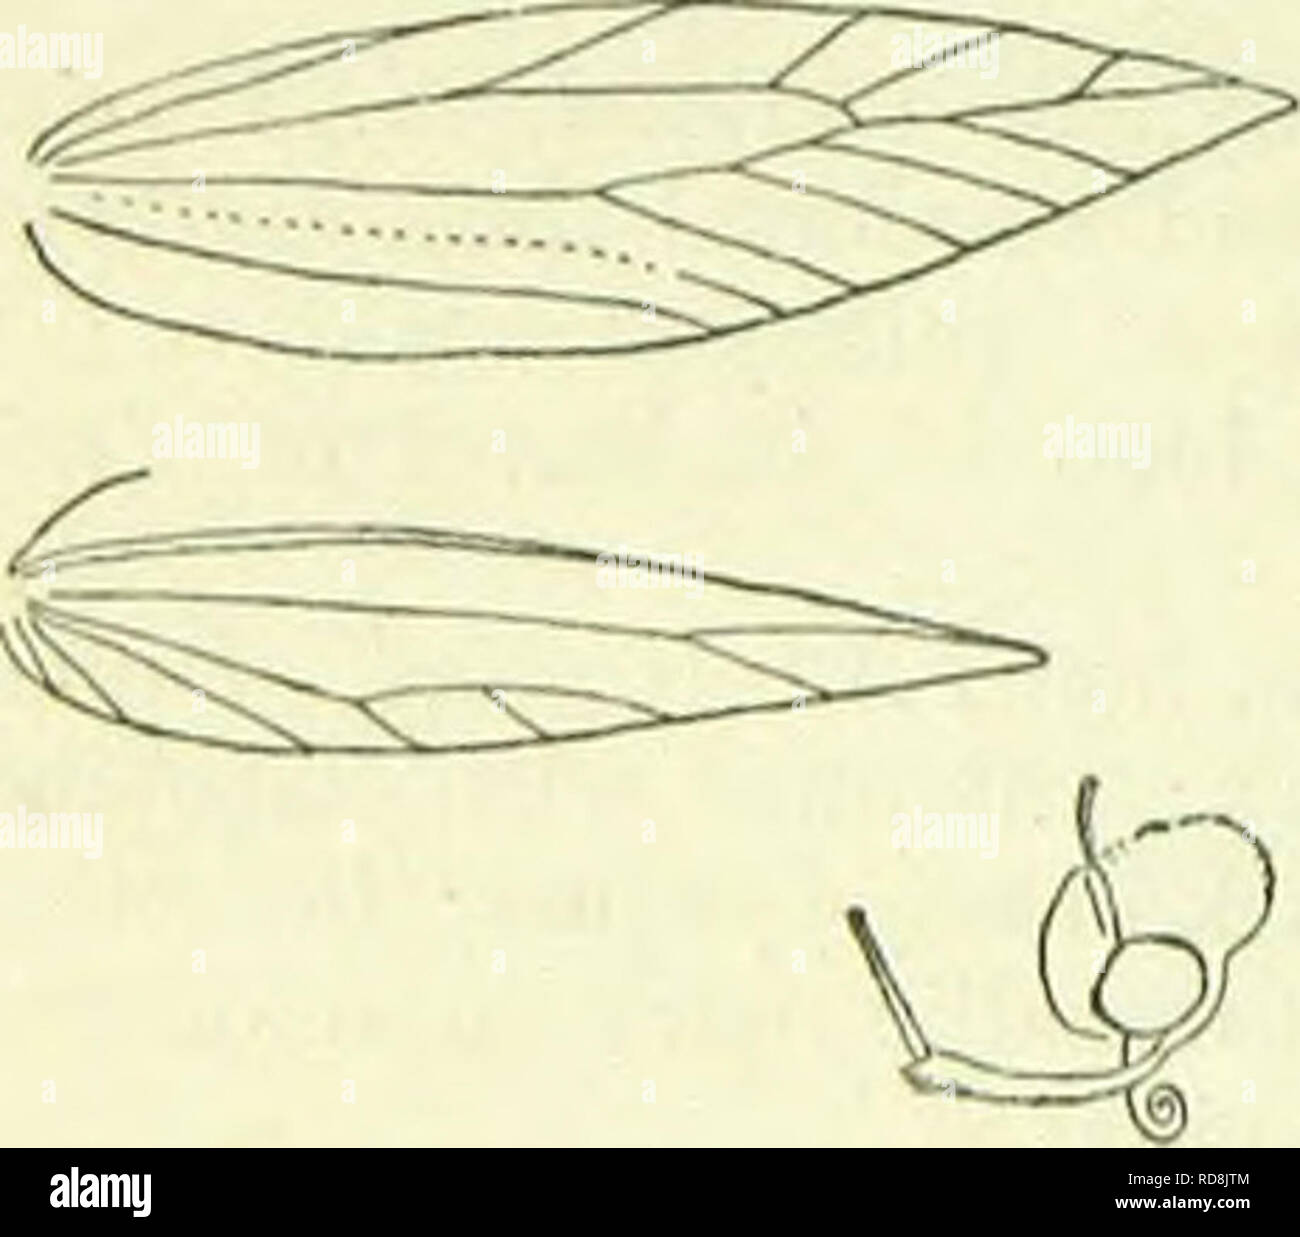 . A handbook of British lepidoptera. Lepidoptera. TINEINA [STATHMOPODA J, linear-lanceolate, cilia 6; transverse vein partly absent, G and 7 connate. A rather extensive genus, occurring especially in Australia, New Zealand, the Indo-Malayan and African regions; only two species have been found in Europe. Larva feeding in fruits or galls. Pupa in a silken cocoon. Imago with forewings narrow, broadest near base, long-pointed. All the species in repose often carry the posterior legs semierect, projecting between the anterior and middle pairs. 1. S. pedella, L. 10-14 mm. Forewings ochreous-yellow; Stock Photo